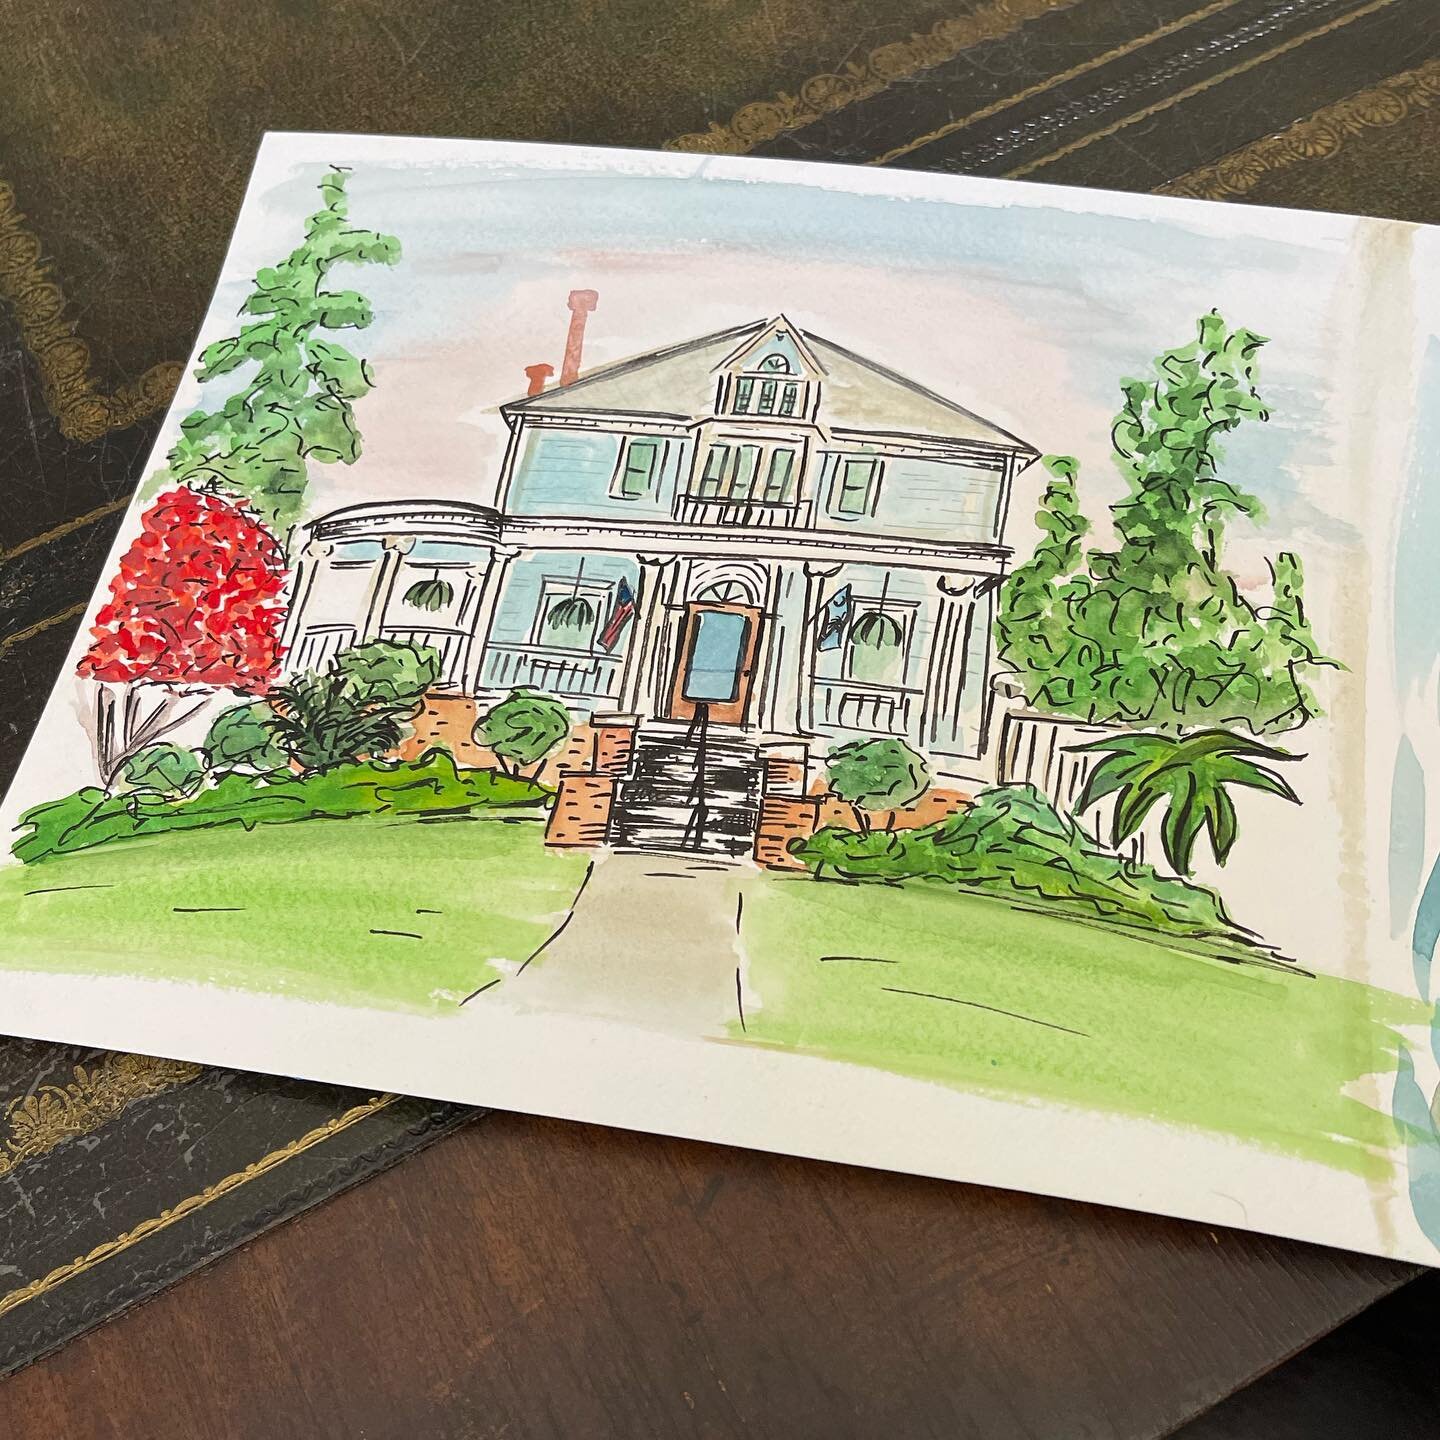 The process: Swipe right to see step one&hellip; I look up the house online and paint it out with @artisticisle.watercolor watercolor. Her watercolors are handmade, professional grade and environmentally friendly. Check her out! Step 2&hellip; Draw i